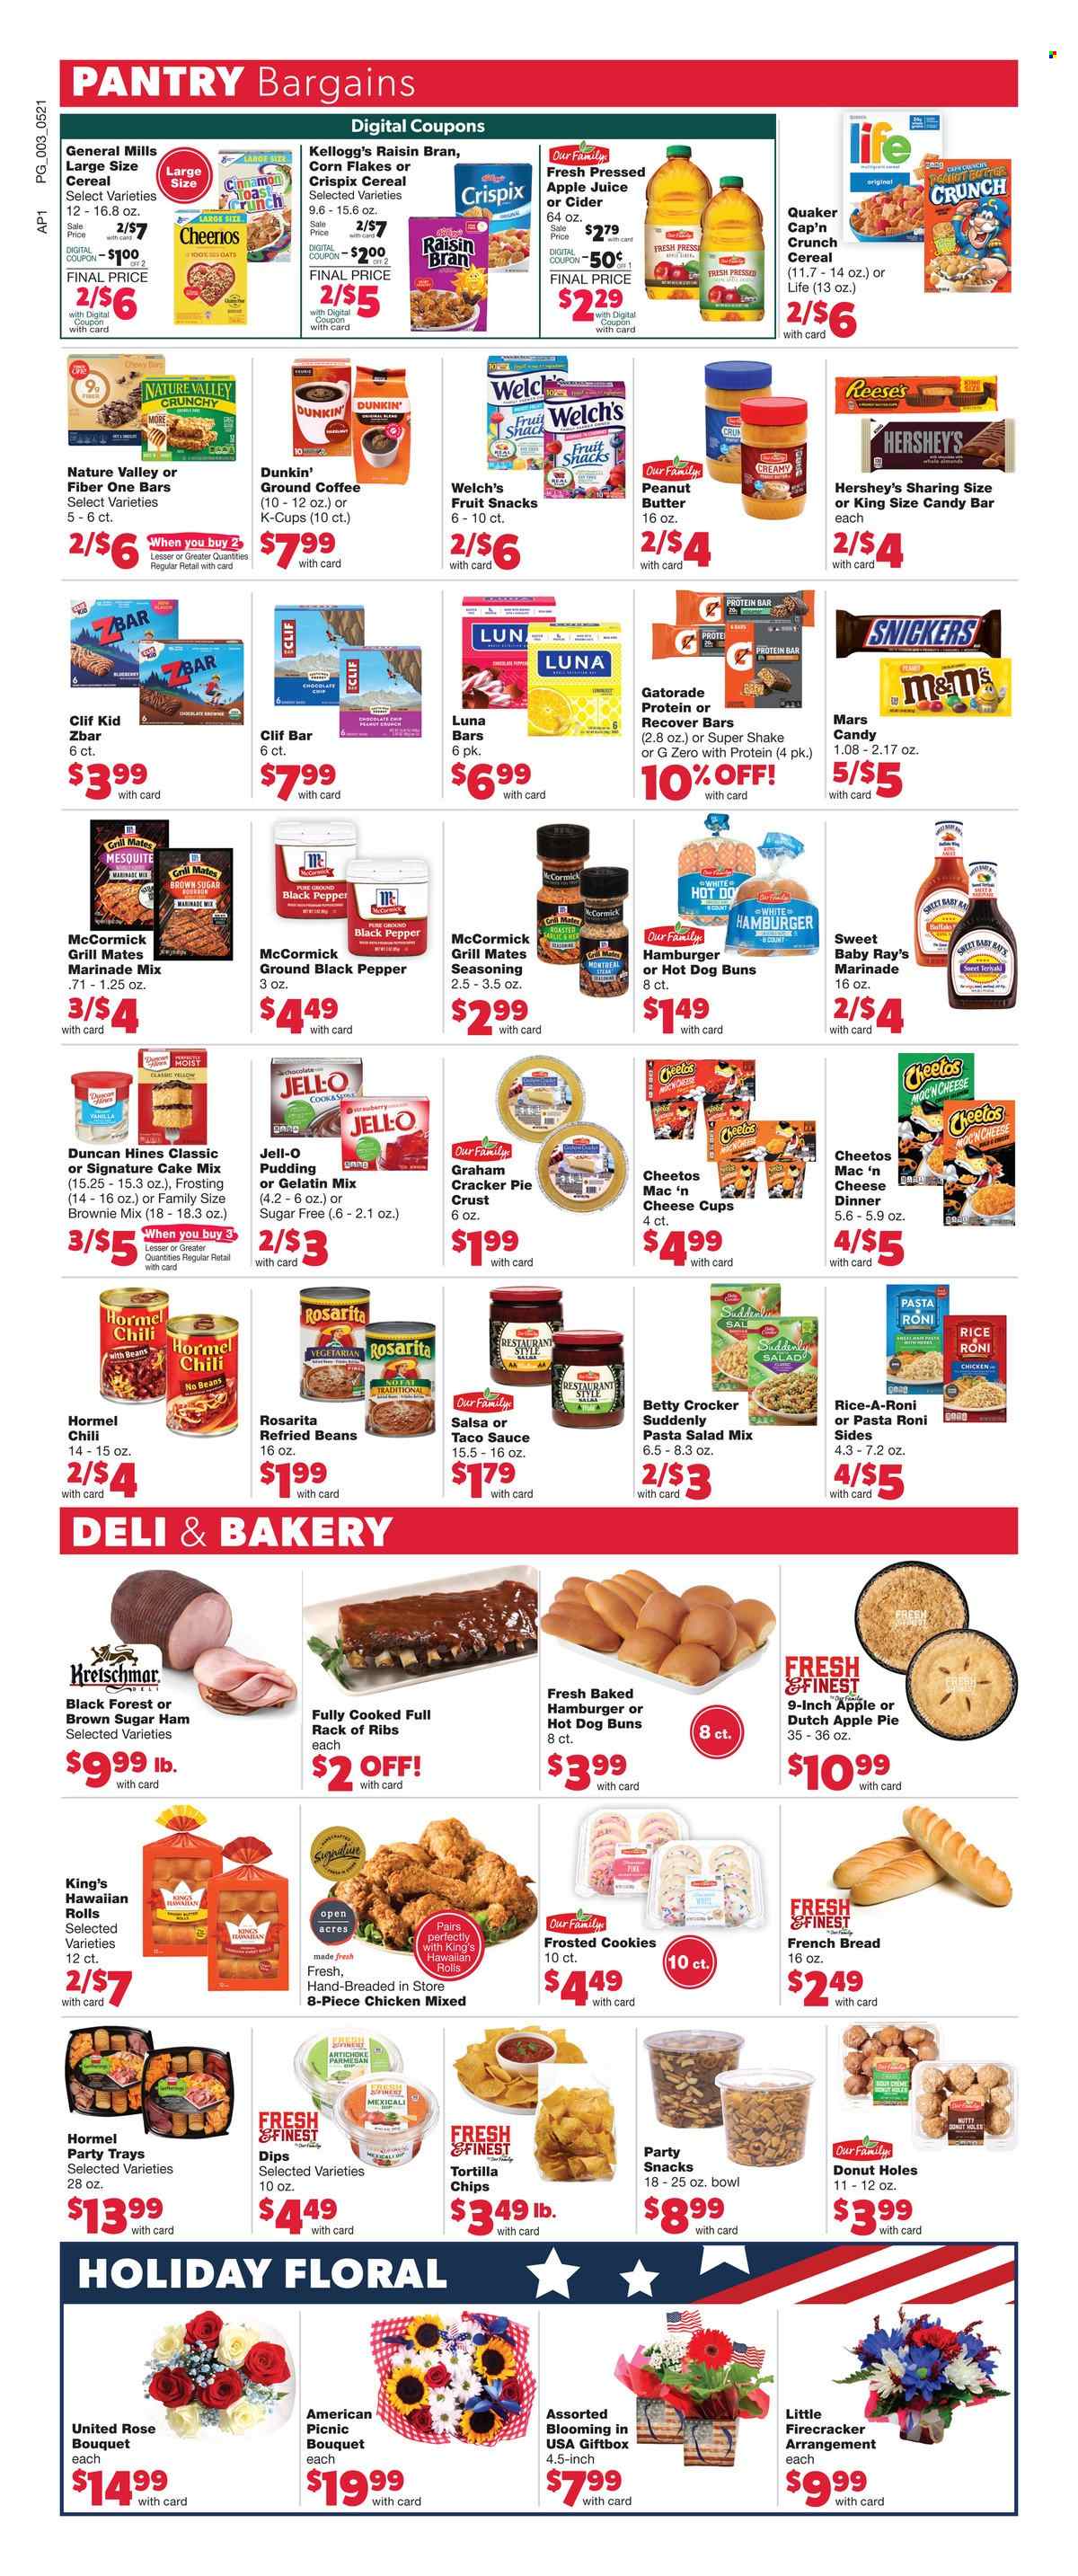 thumbnail - Family Fare Flyer - 05/21/2023 - 05/29/2023 - Sales products - bread, buns, french bread, apple pie, donut holes, hawaiian rolls, brownie mix, cake mix, artichoke, salad, Welch's, sauce, Quaker, Hormel, ham, pasta salad, cheese cup, parmesan, pudding, shake, Reese's, Hershey's, cookies, chocolate chips, Snickers, Mars, M&M's, cereal bar, crackers, Kellogg's, fruit snack, chocolate bar, candy bar, tortilla chips, Cheetos, chips, frosting, pie crust, oats, Jell-O, refried beans, cereals, Cheerios, corn flakes, protein bar, Cap'n Crunch, Raisin Bran, Nature Valley, Fiber One, rice, spice, cinnamon, taco sauce, salsa, marinade, almonds, apple juice, juice, Gatorade, coffee, ground coffee, coffee capsules, K-Cups, cider, chicken, ribs, bouquet, rose, electrolyte drink. Page 4.